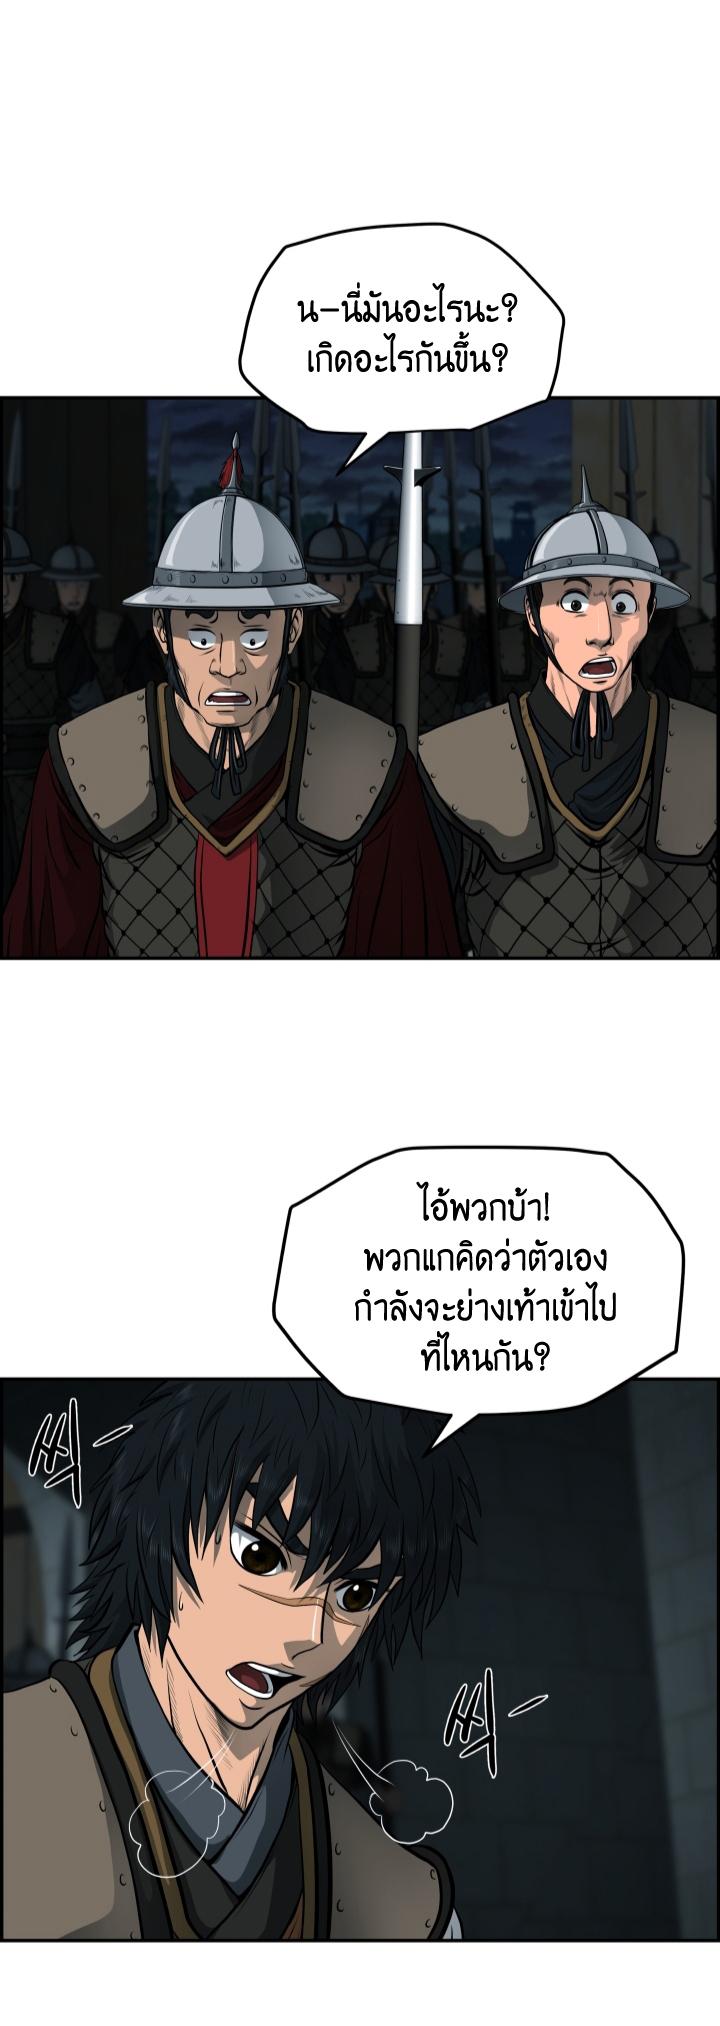 Blade of Wind and Thunder 25 (31)